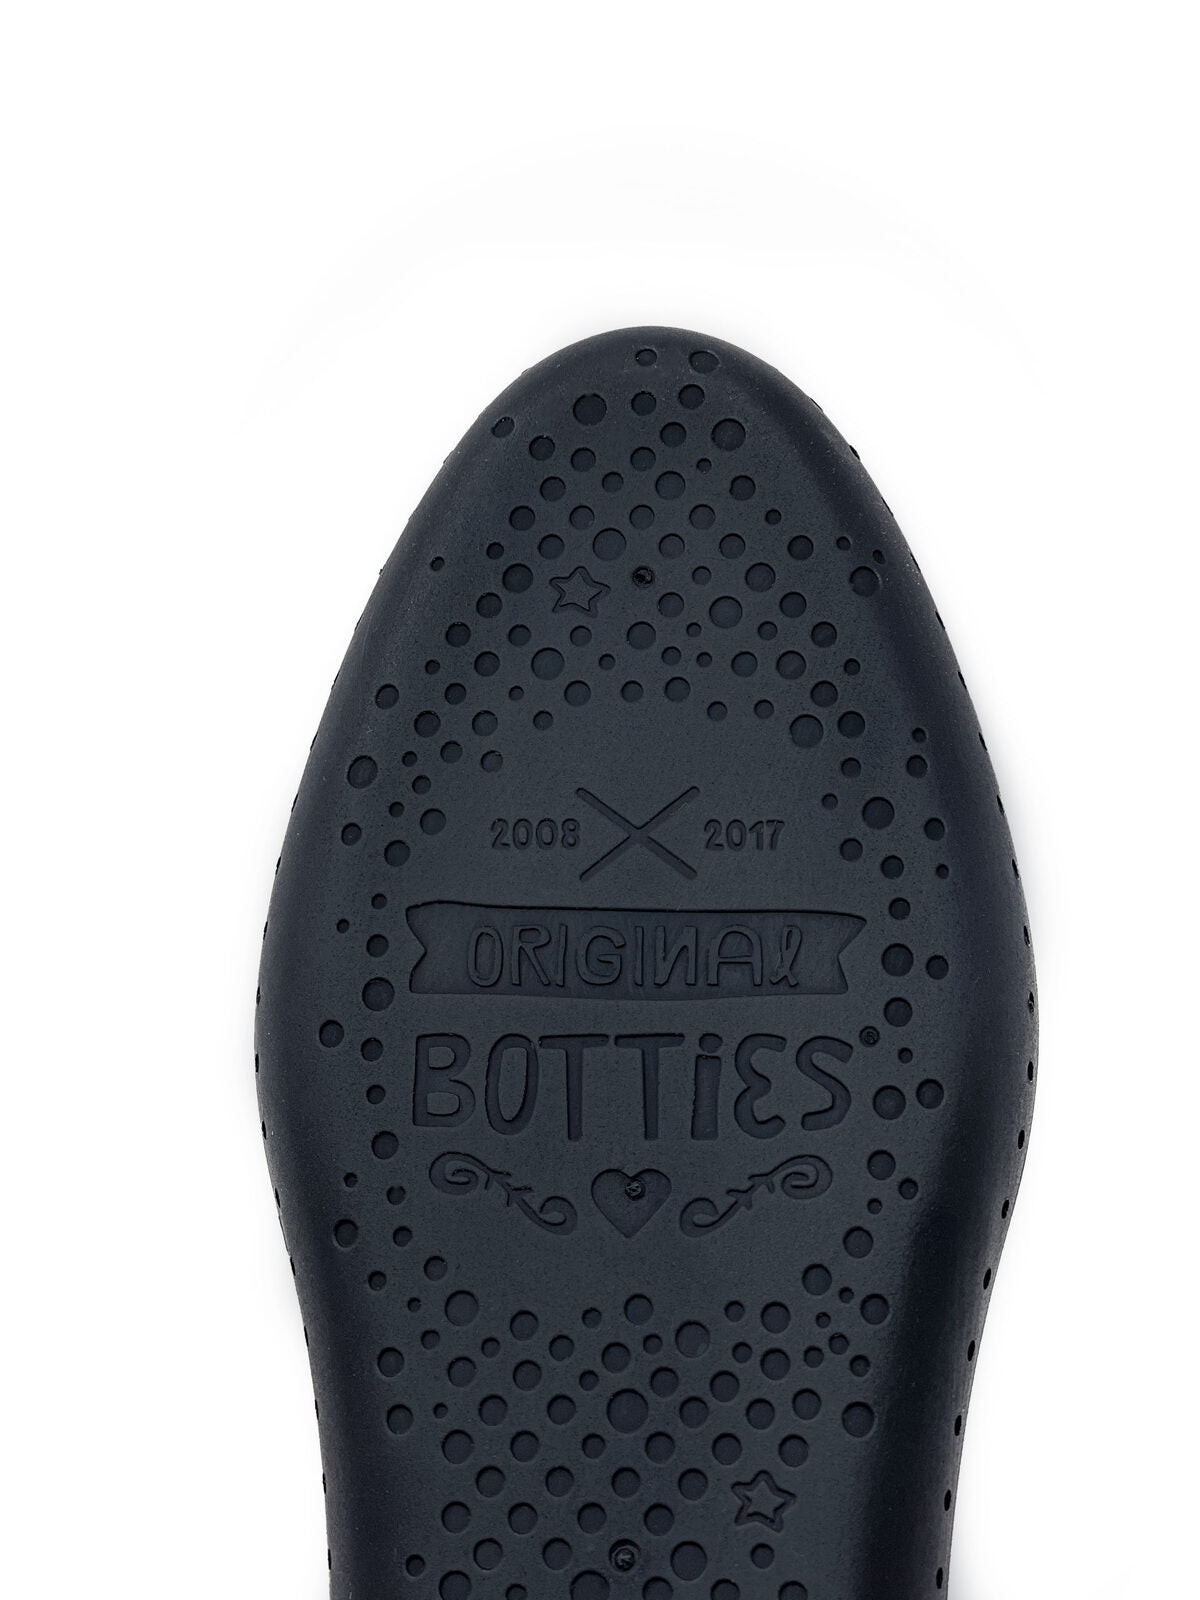 Botties - Soles for do-it-yourself shoes